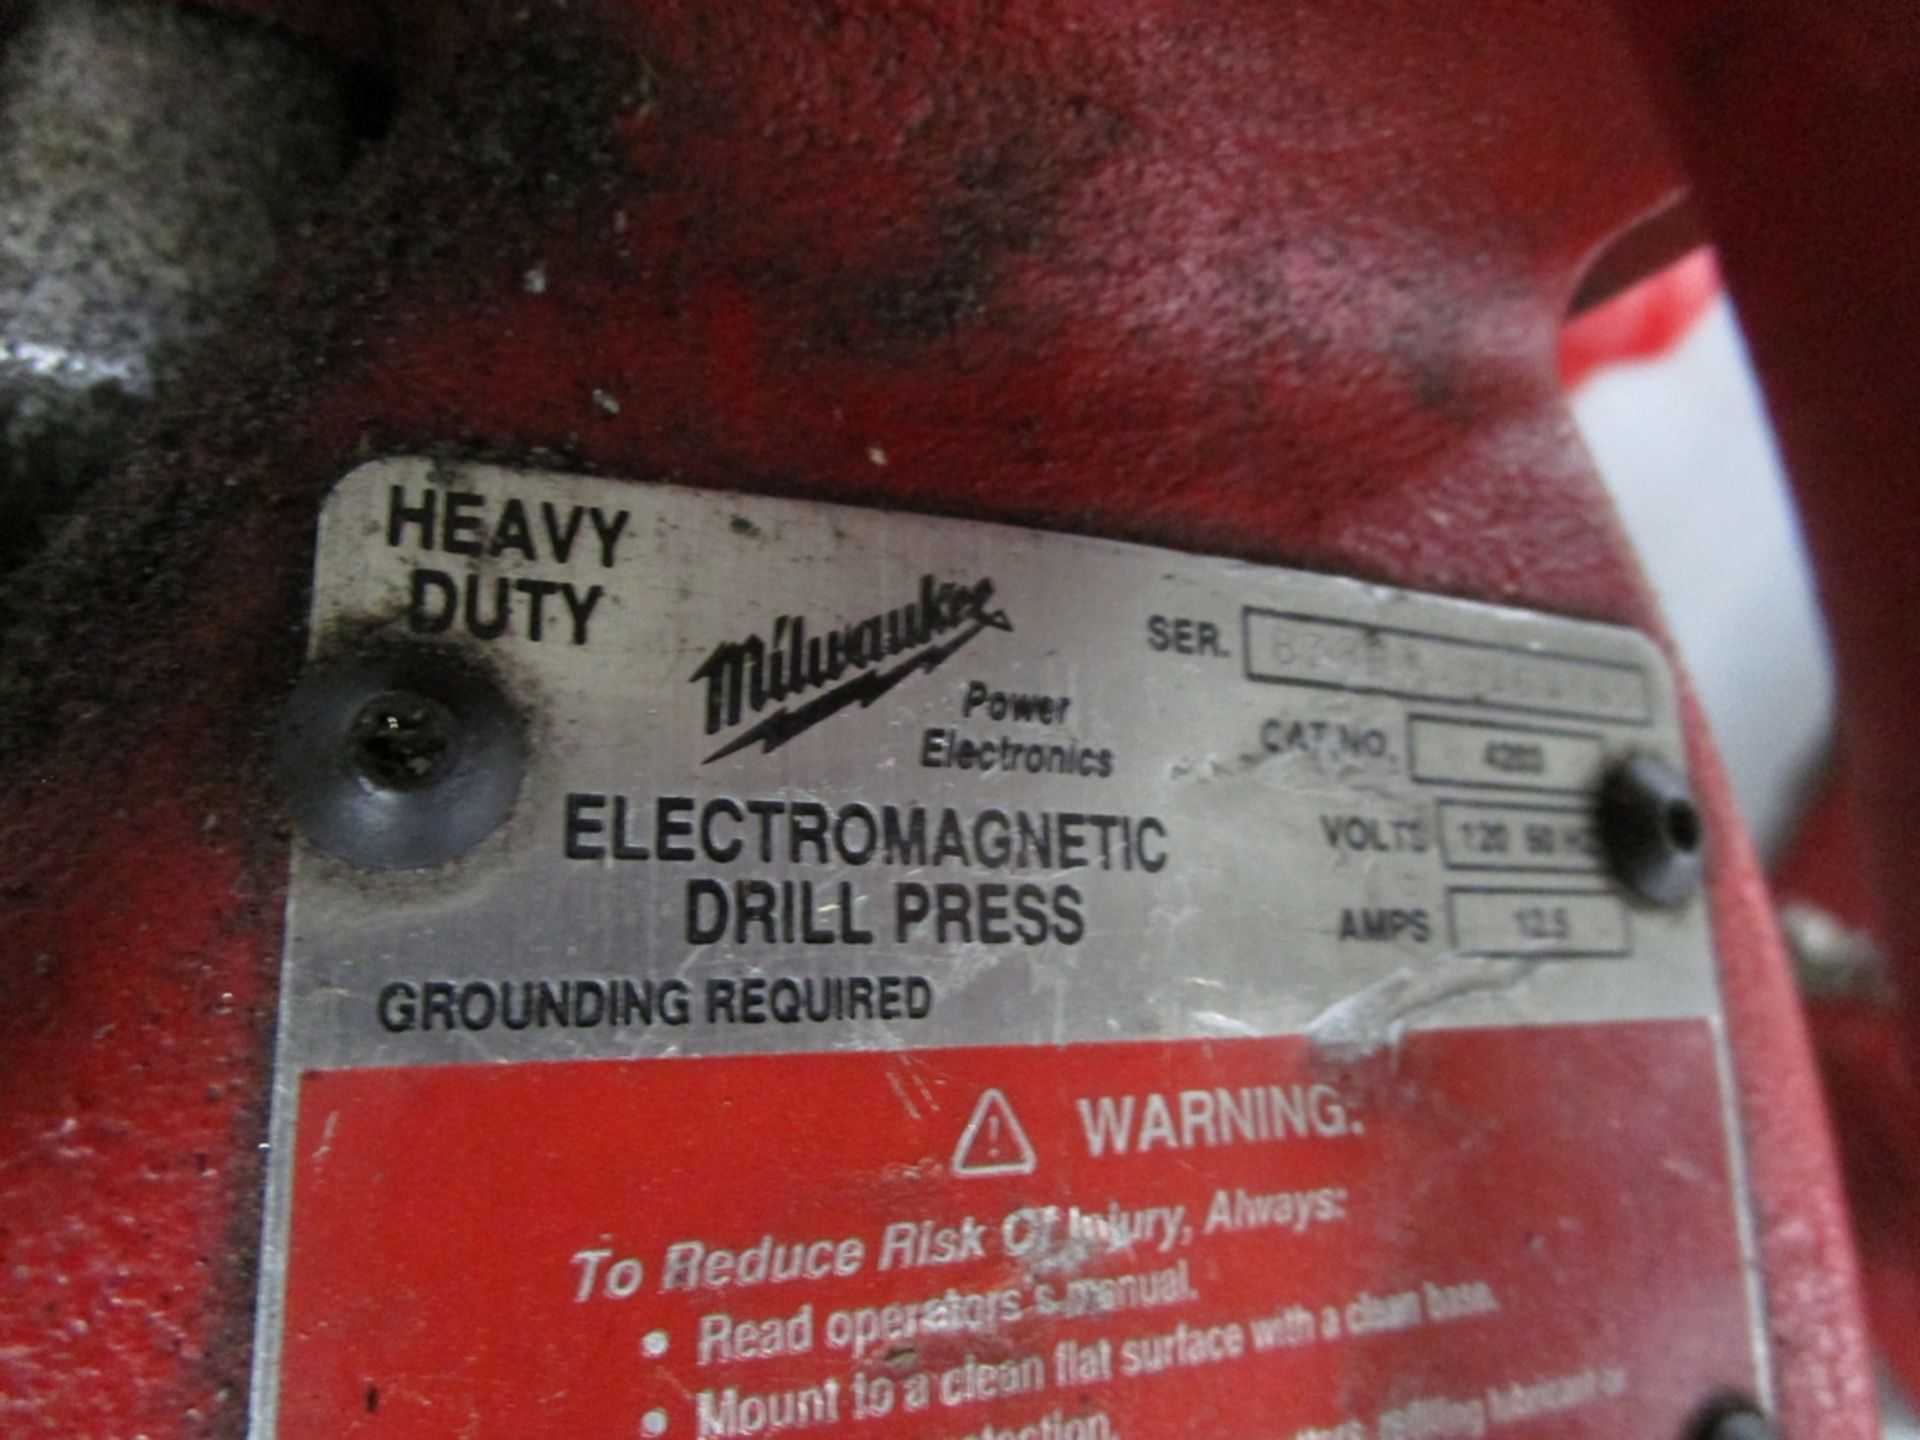 Milwaukee 4262-1 3/4"" Magnetic Base Drill Press - Image 3 of 3